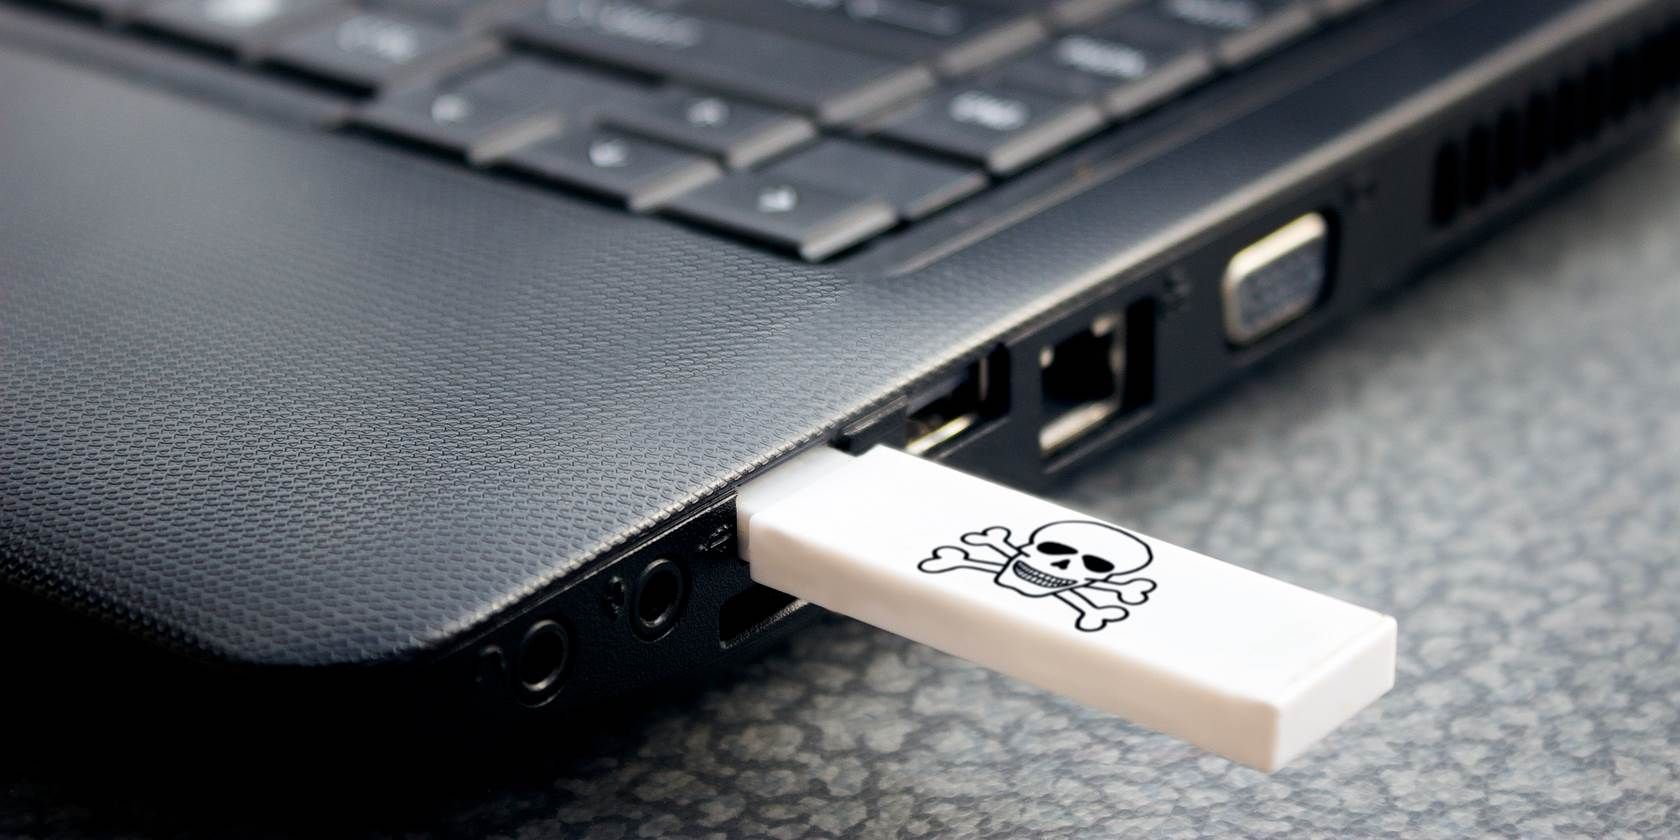 USB stick in a laptop, showing a skull and crossbones